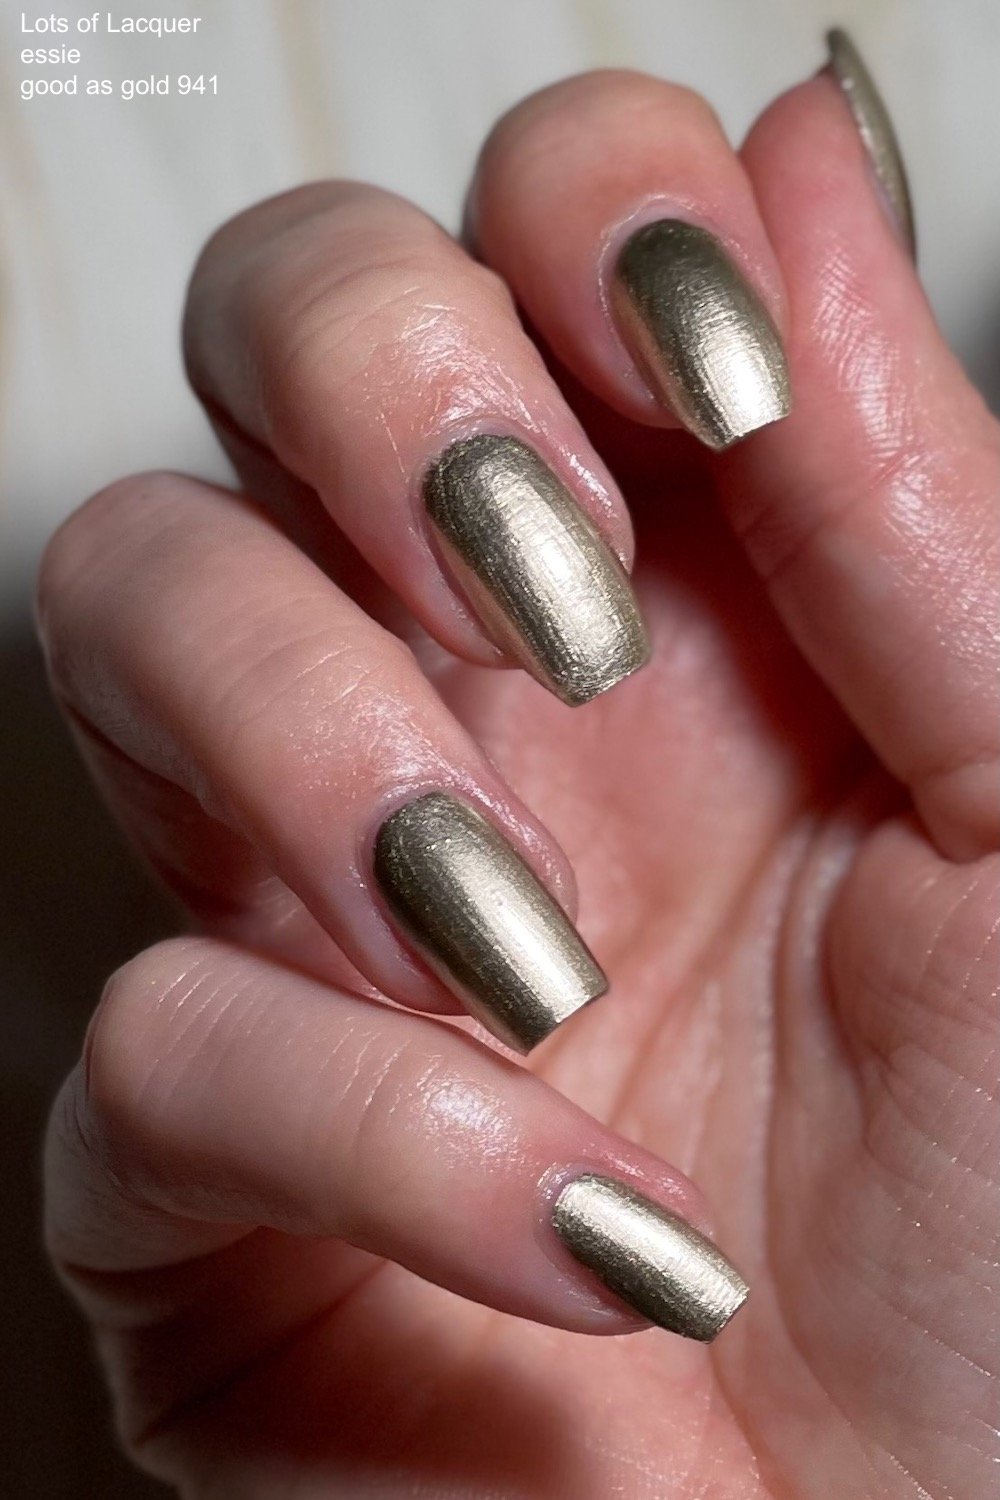 essie good as gold Review and Swatches — Lots of Lacquer